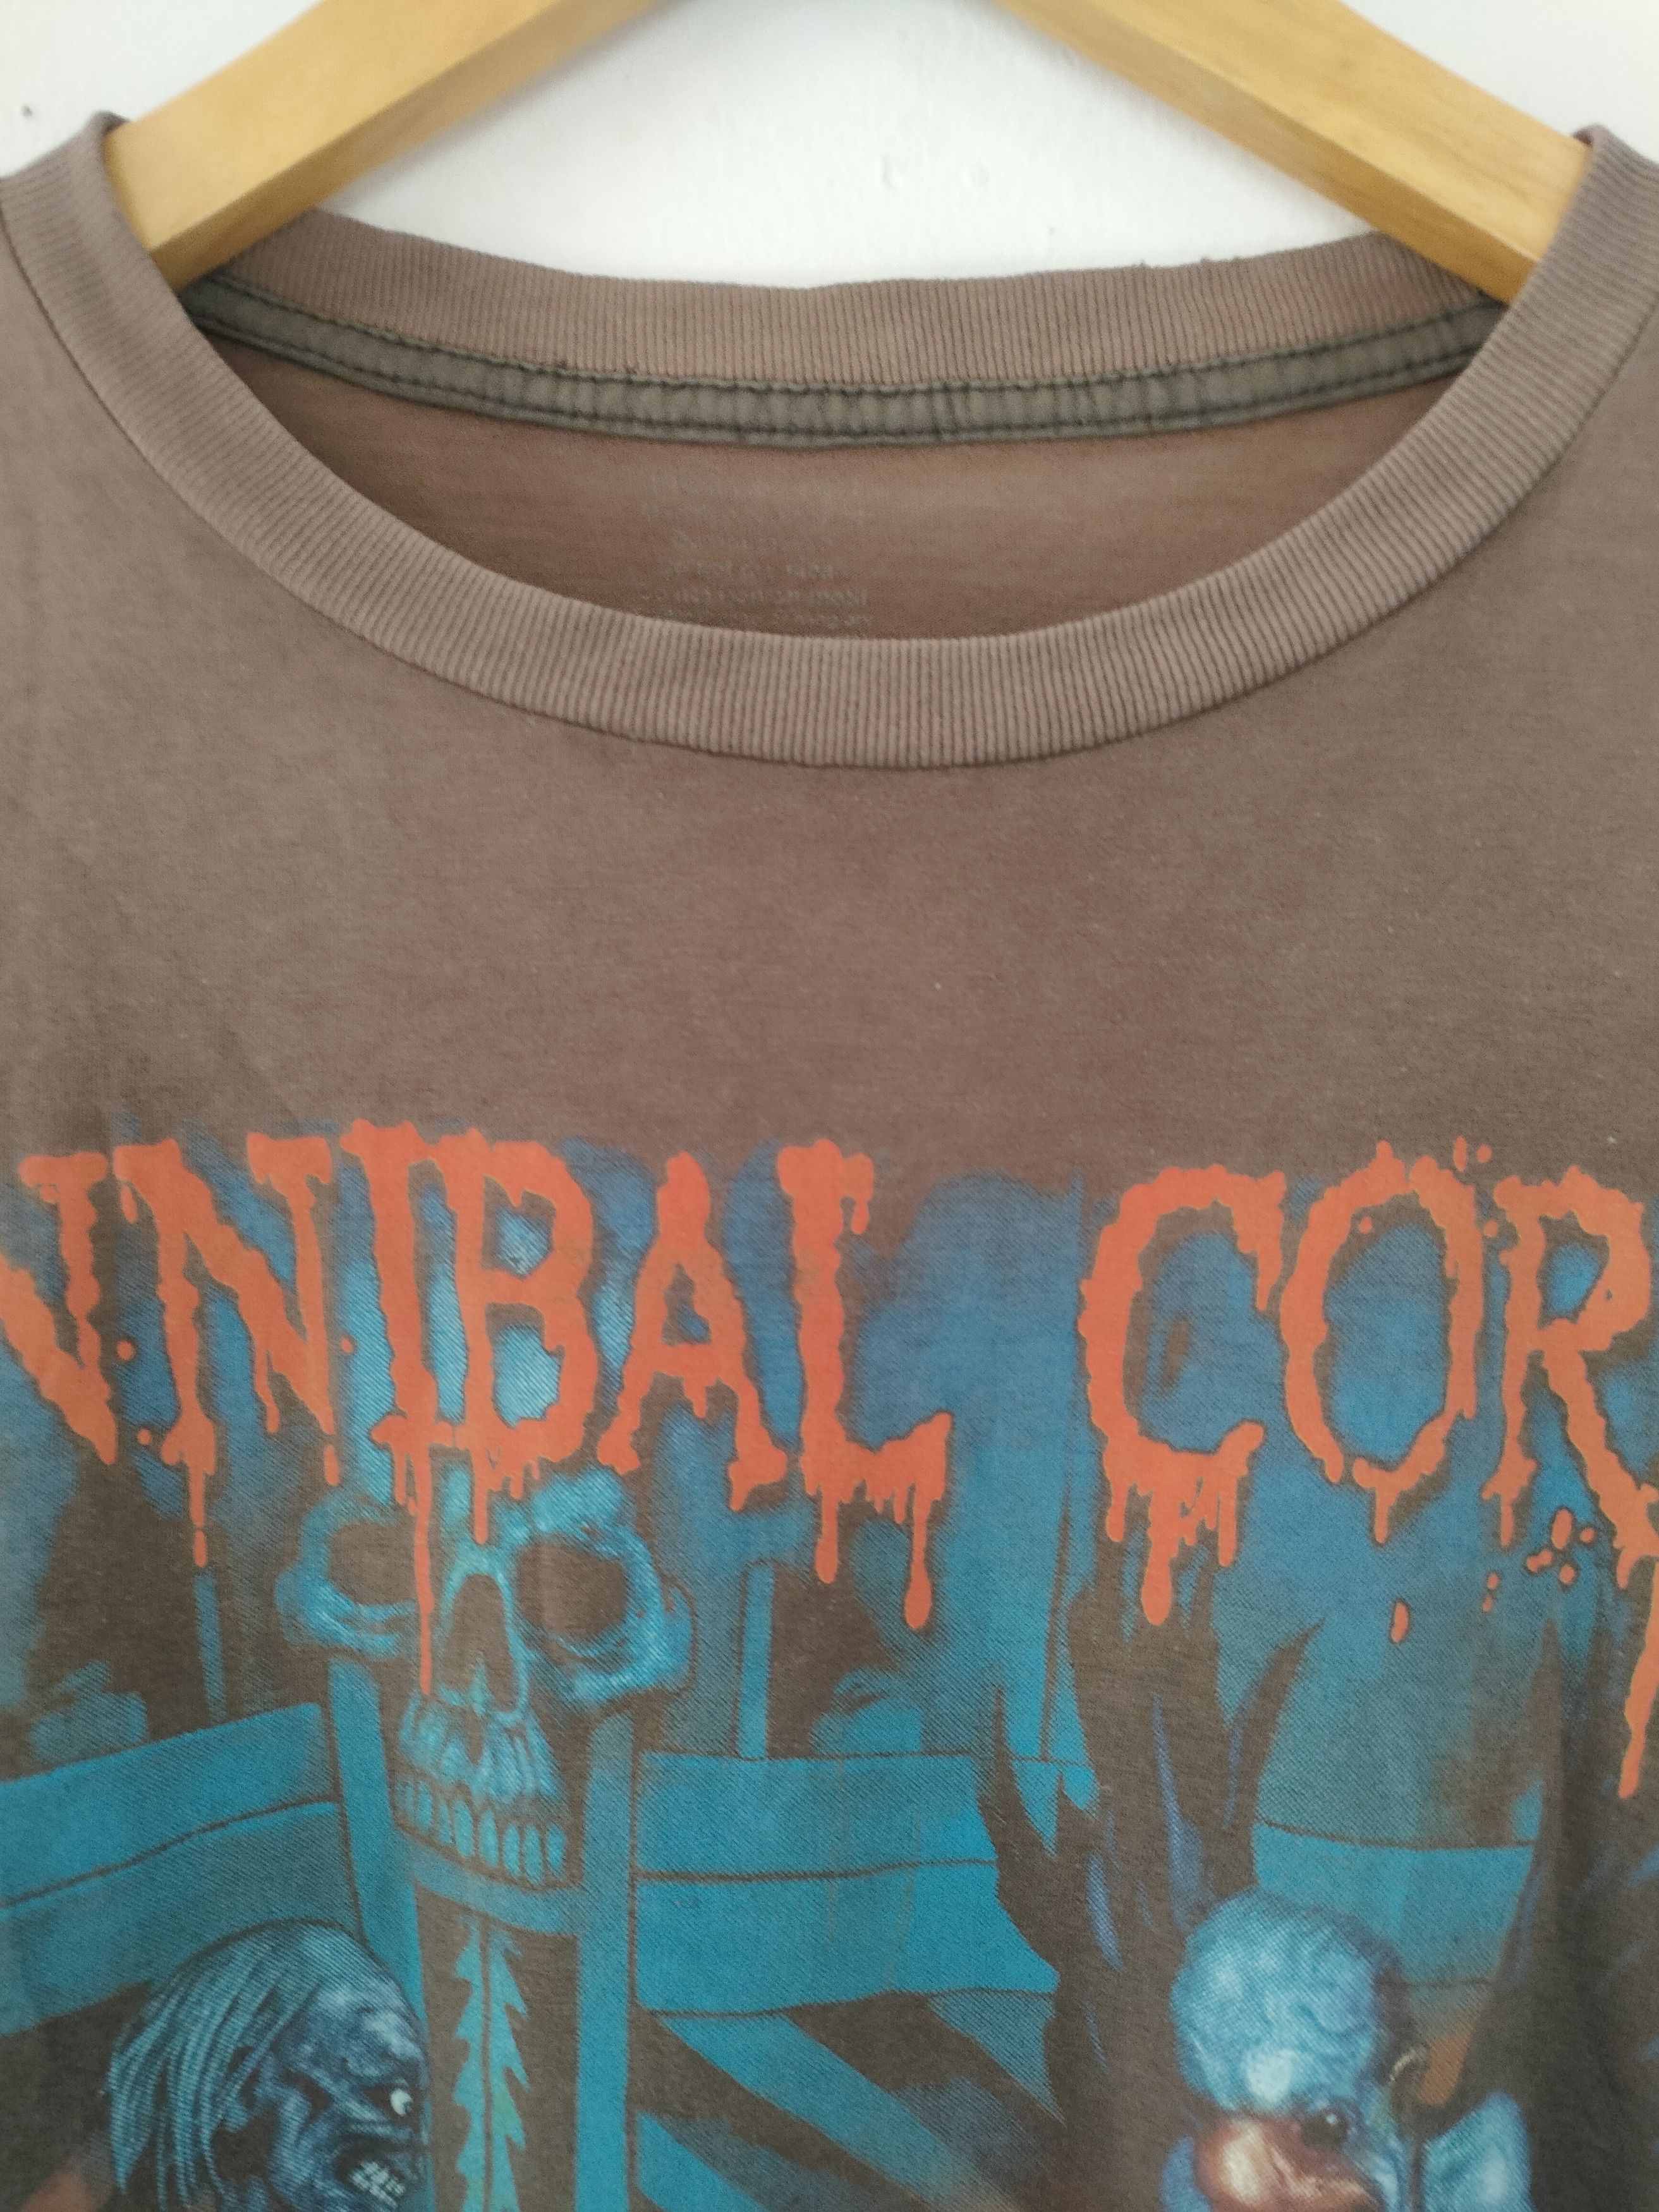 CANNIBAL CORPSE VINTAGE SHIRT THE WRETCHED SPAWN - 12